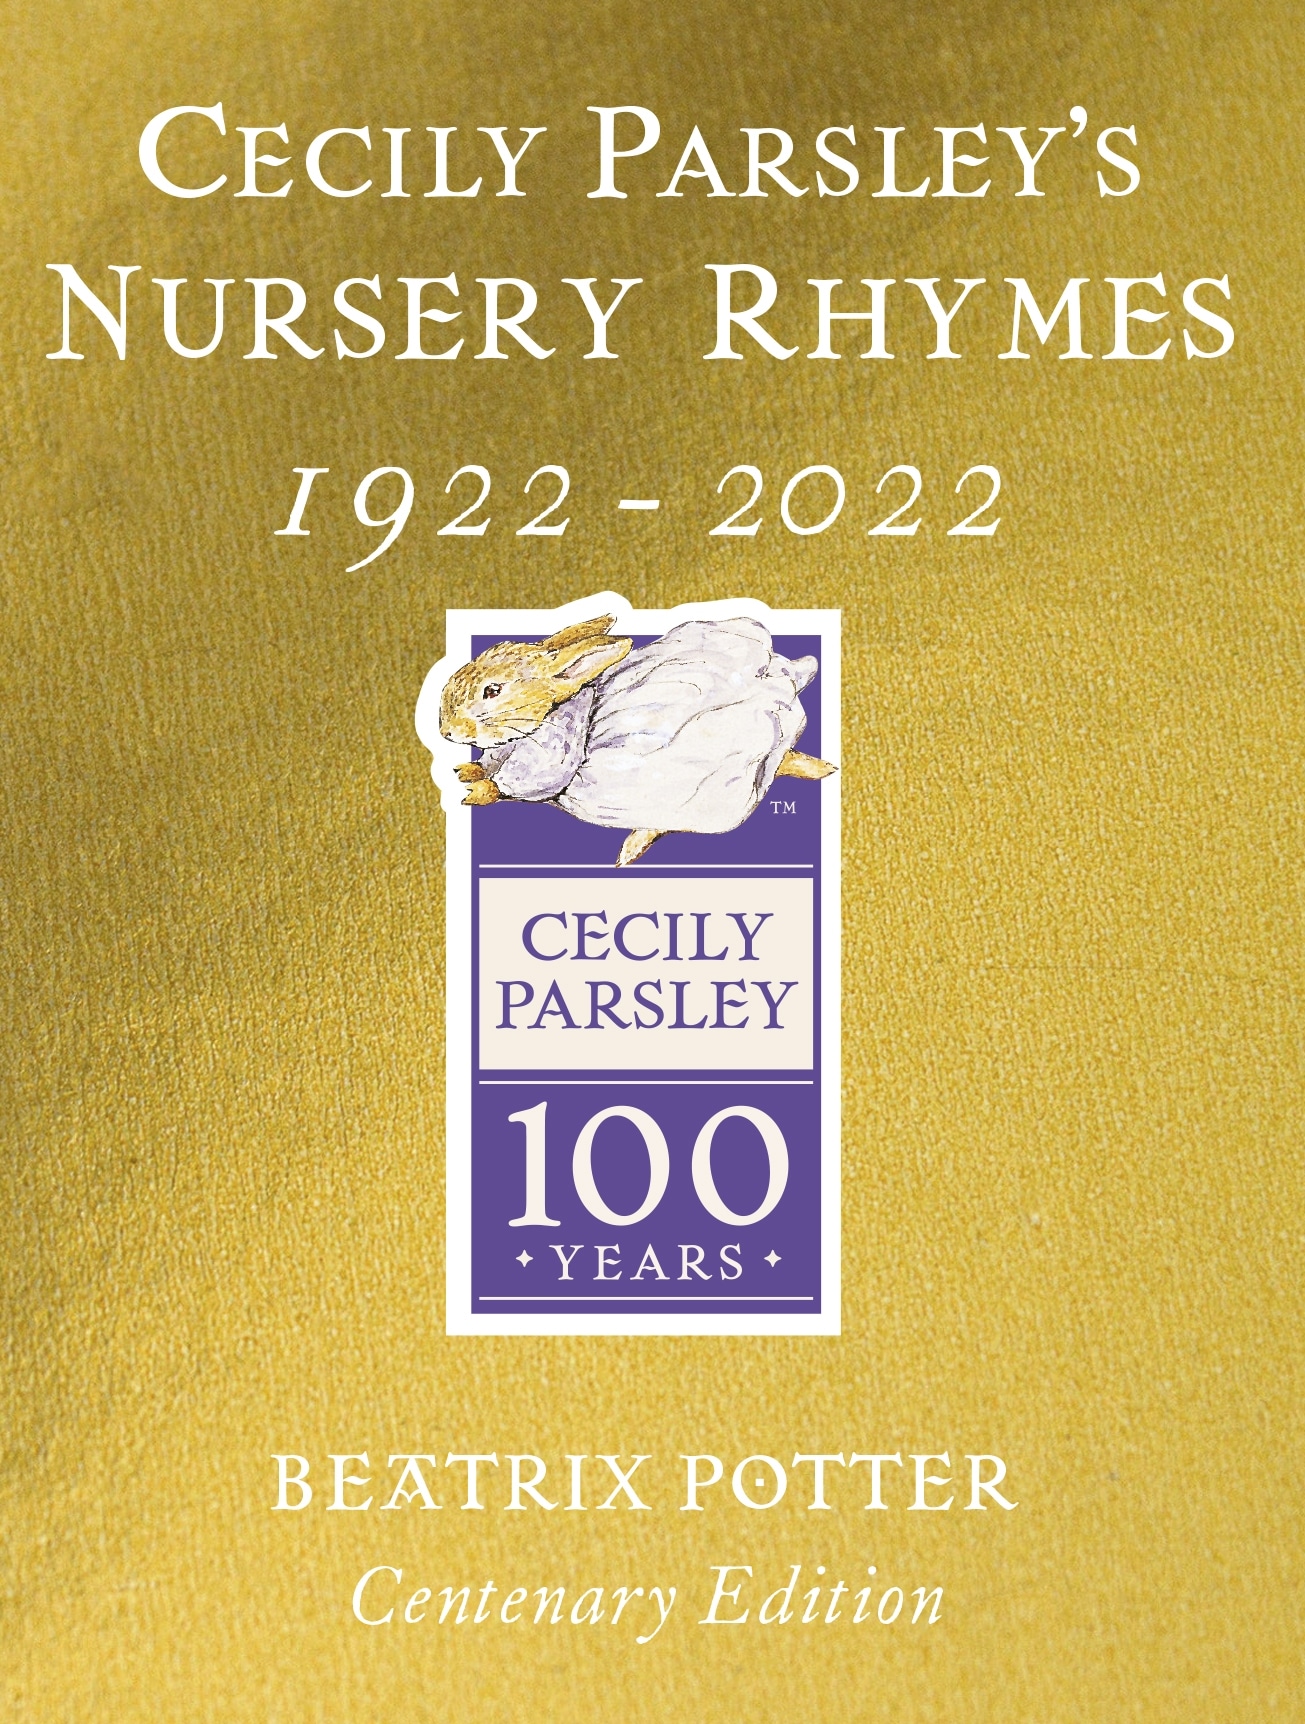 Book “Cecily Parsley's Nursery Rhymes” by Beatrix Potter — January 6, 2022